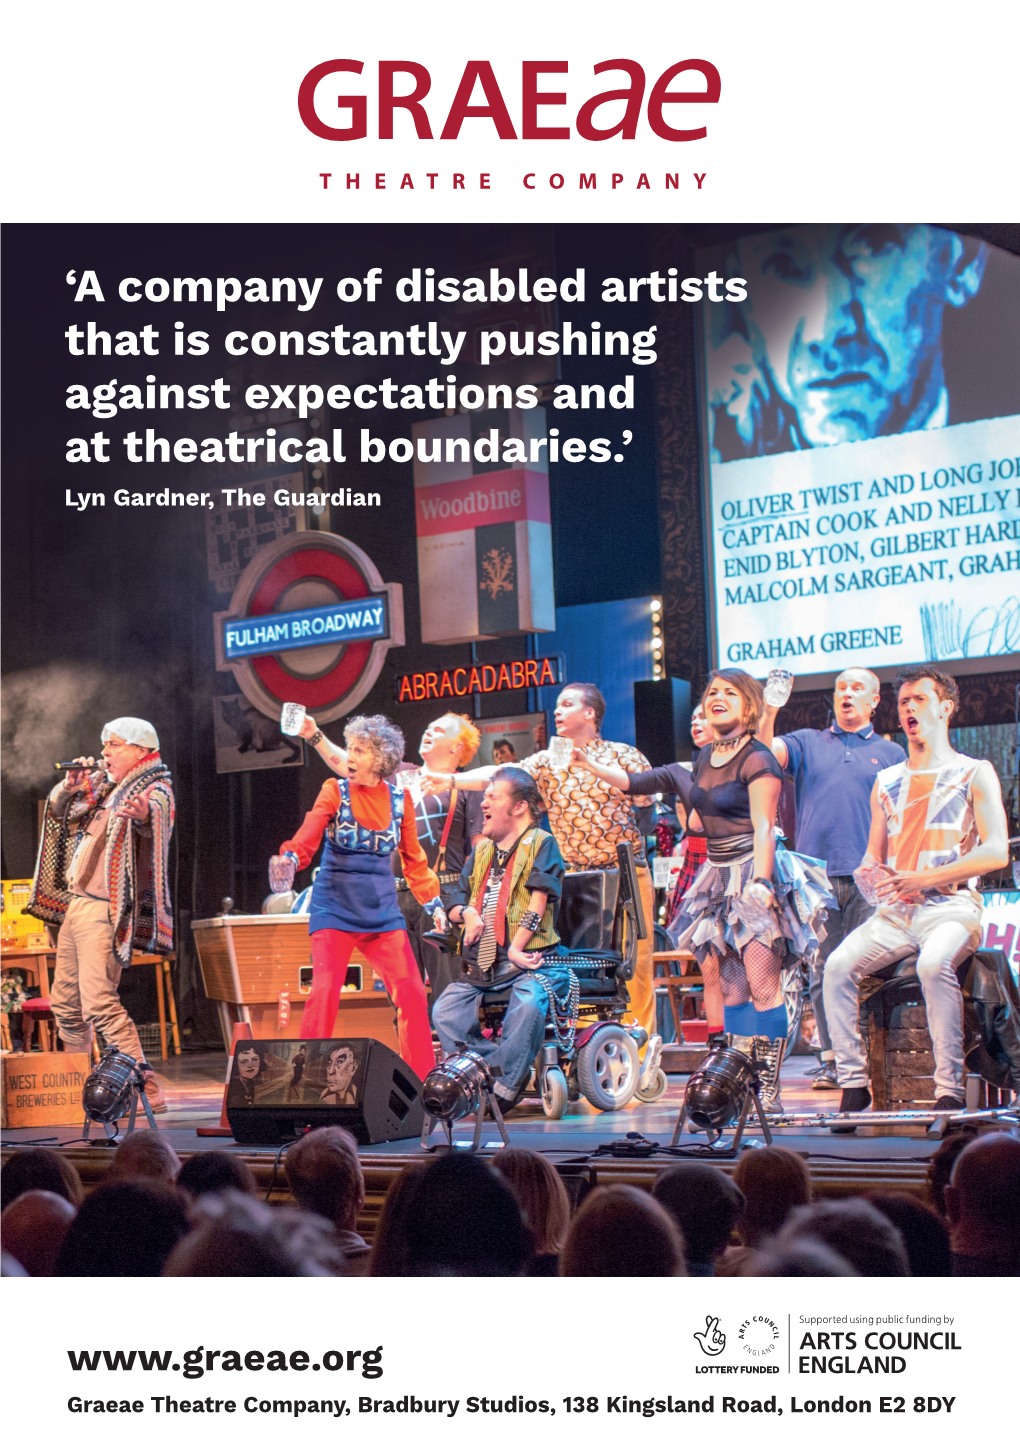 A Company of Disabled Artists That Is Constantly Pushing Against Expectations and at Theatrical Boundaries.’ Lyn Gardner, the Guardian